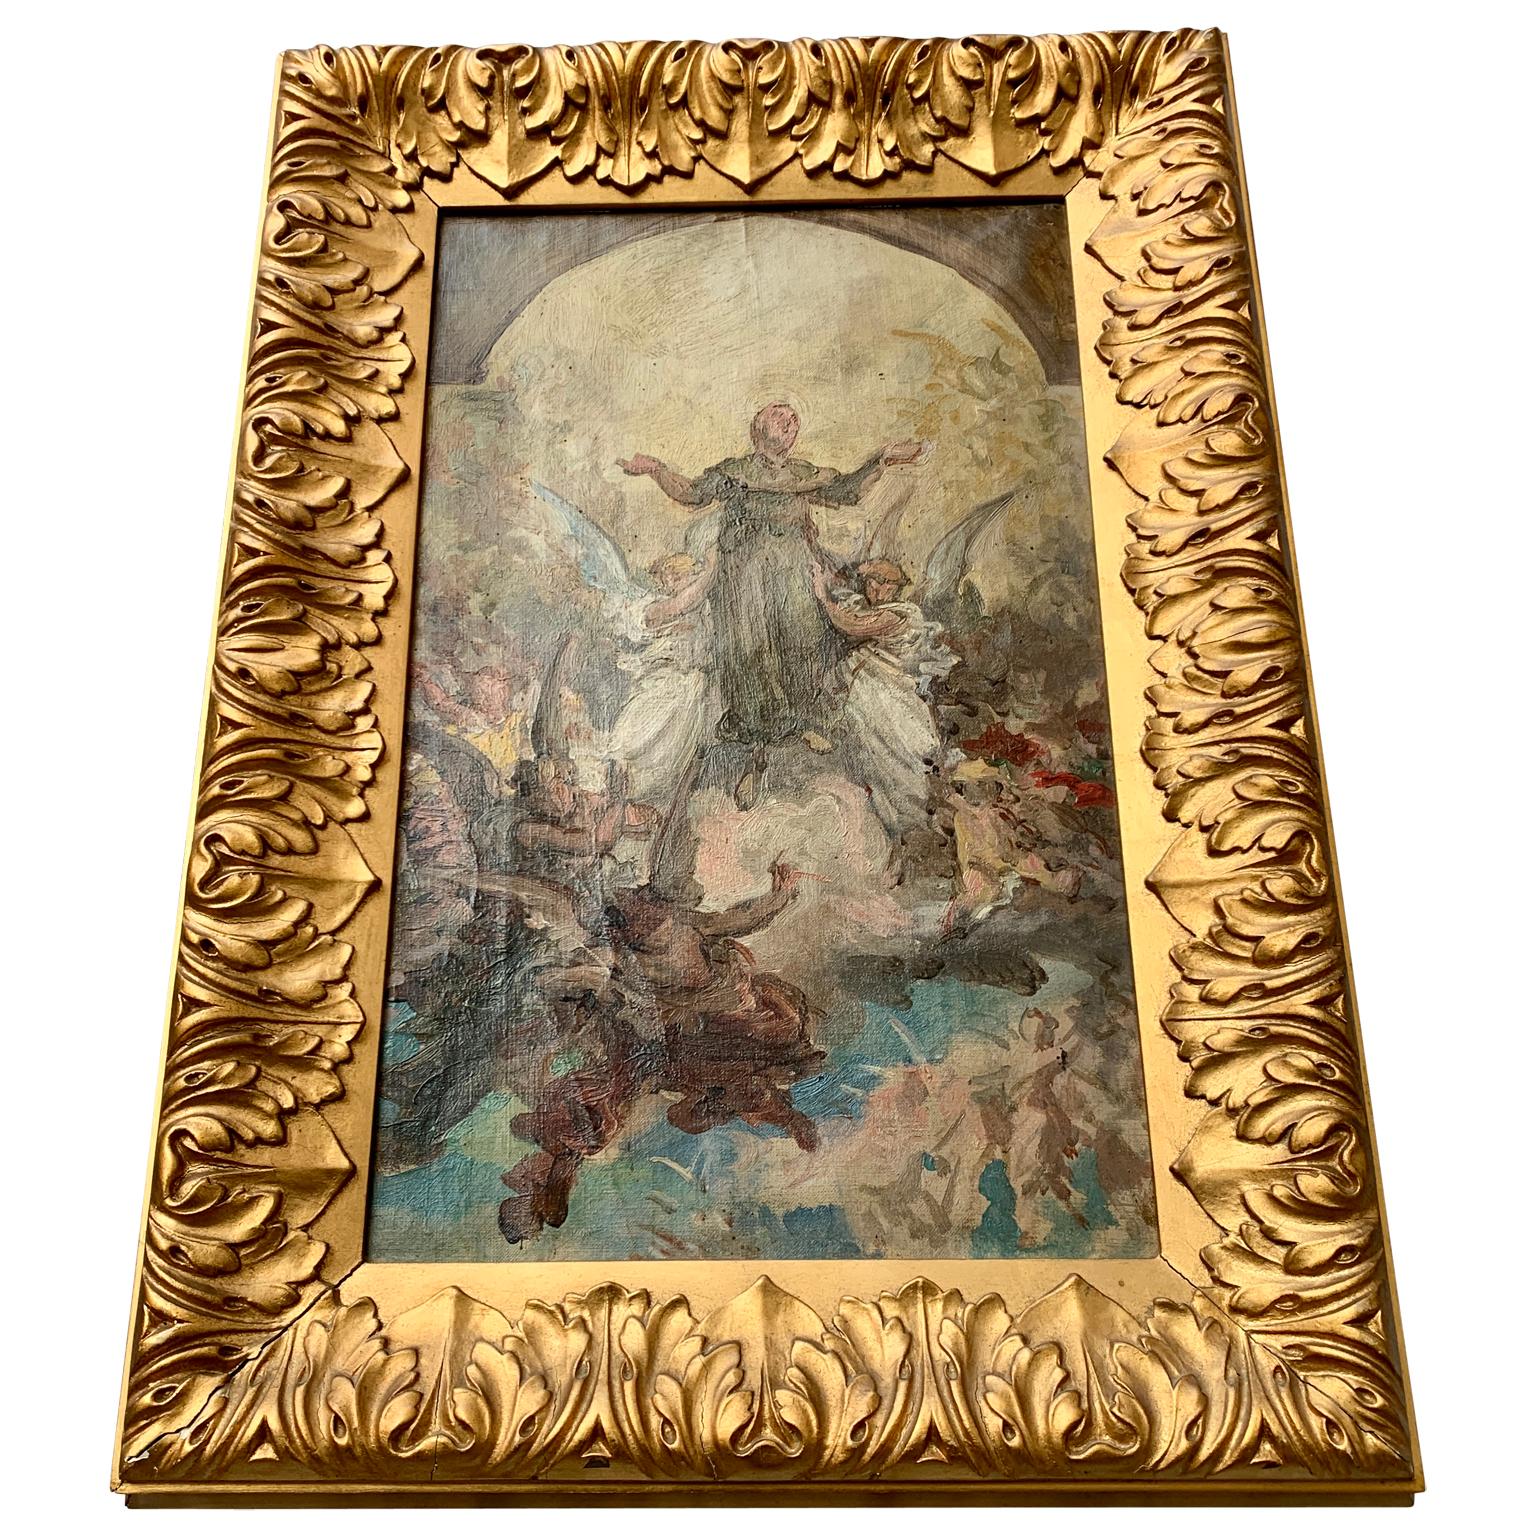 An oil painting, most probably a study of a bigger altar painting for an Italian church by the the Italian artist Cesare Fracassini (1838-1868). This Fracassini attributed work of art, represent the ascension to heaven of a Saint, lift up by angels